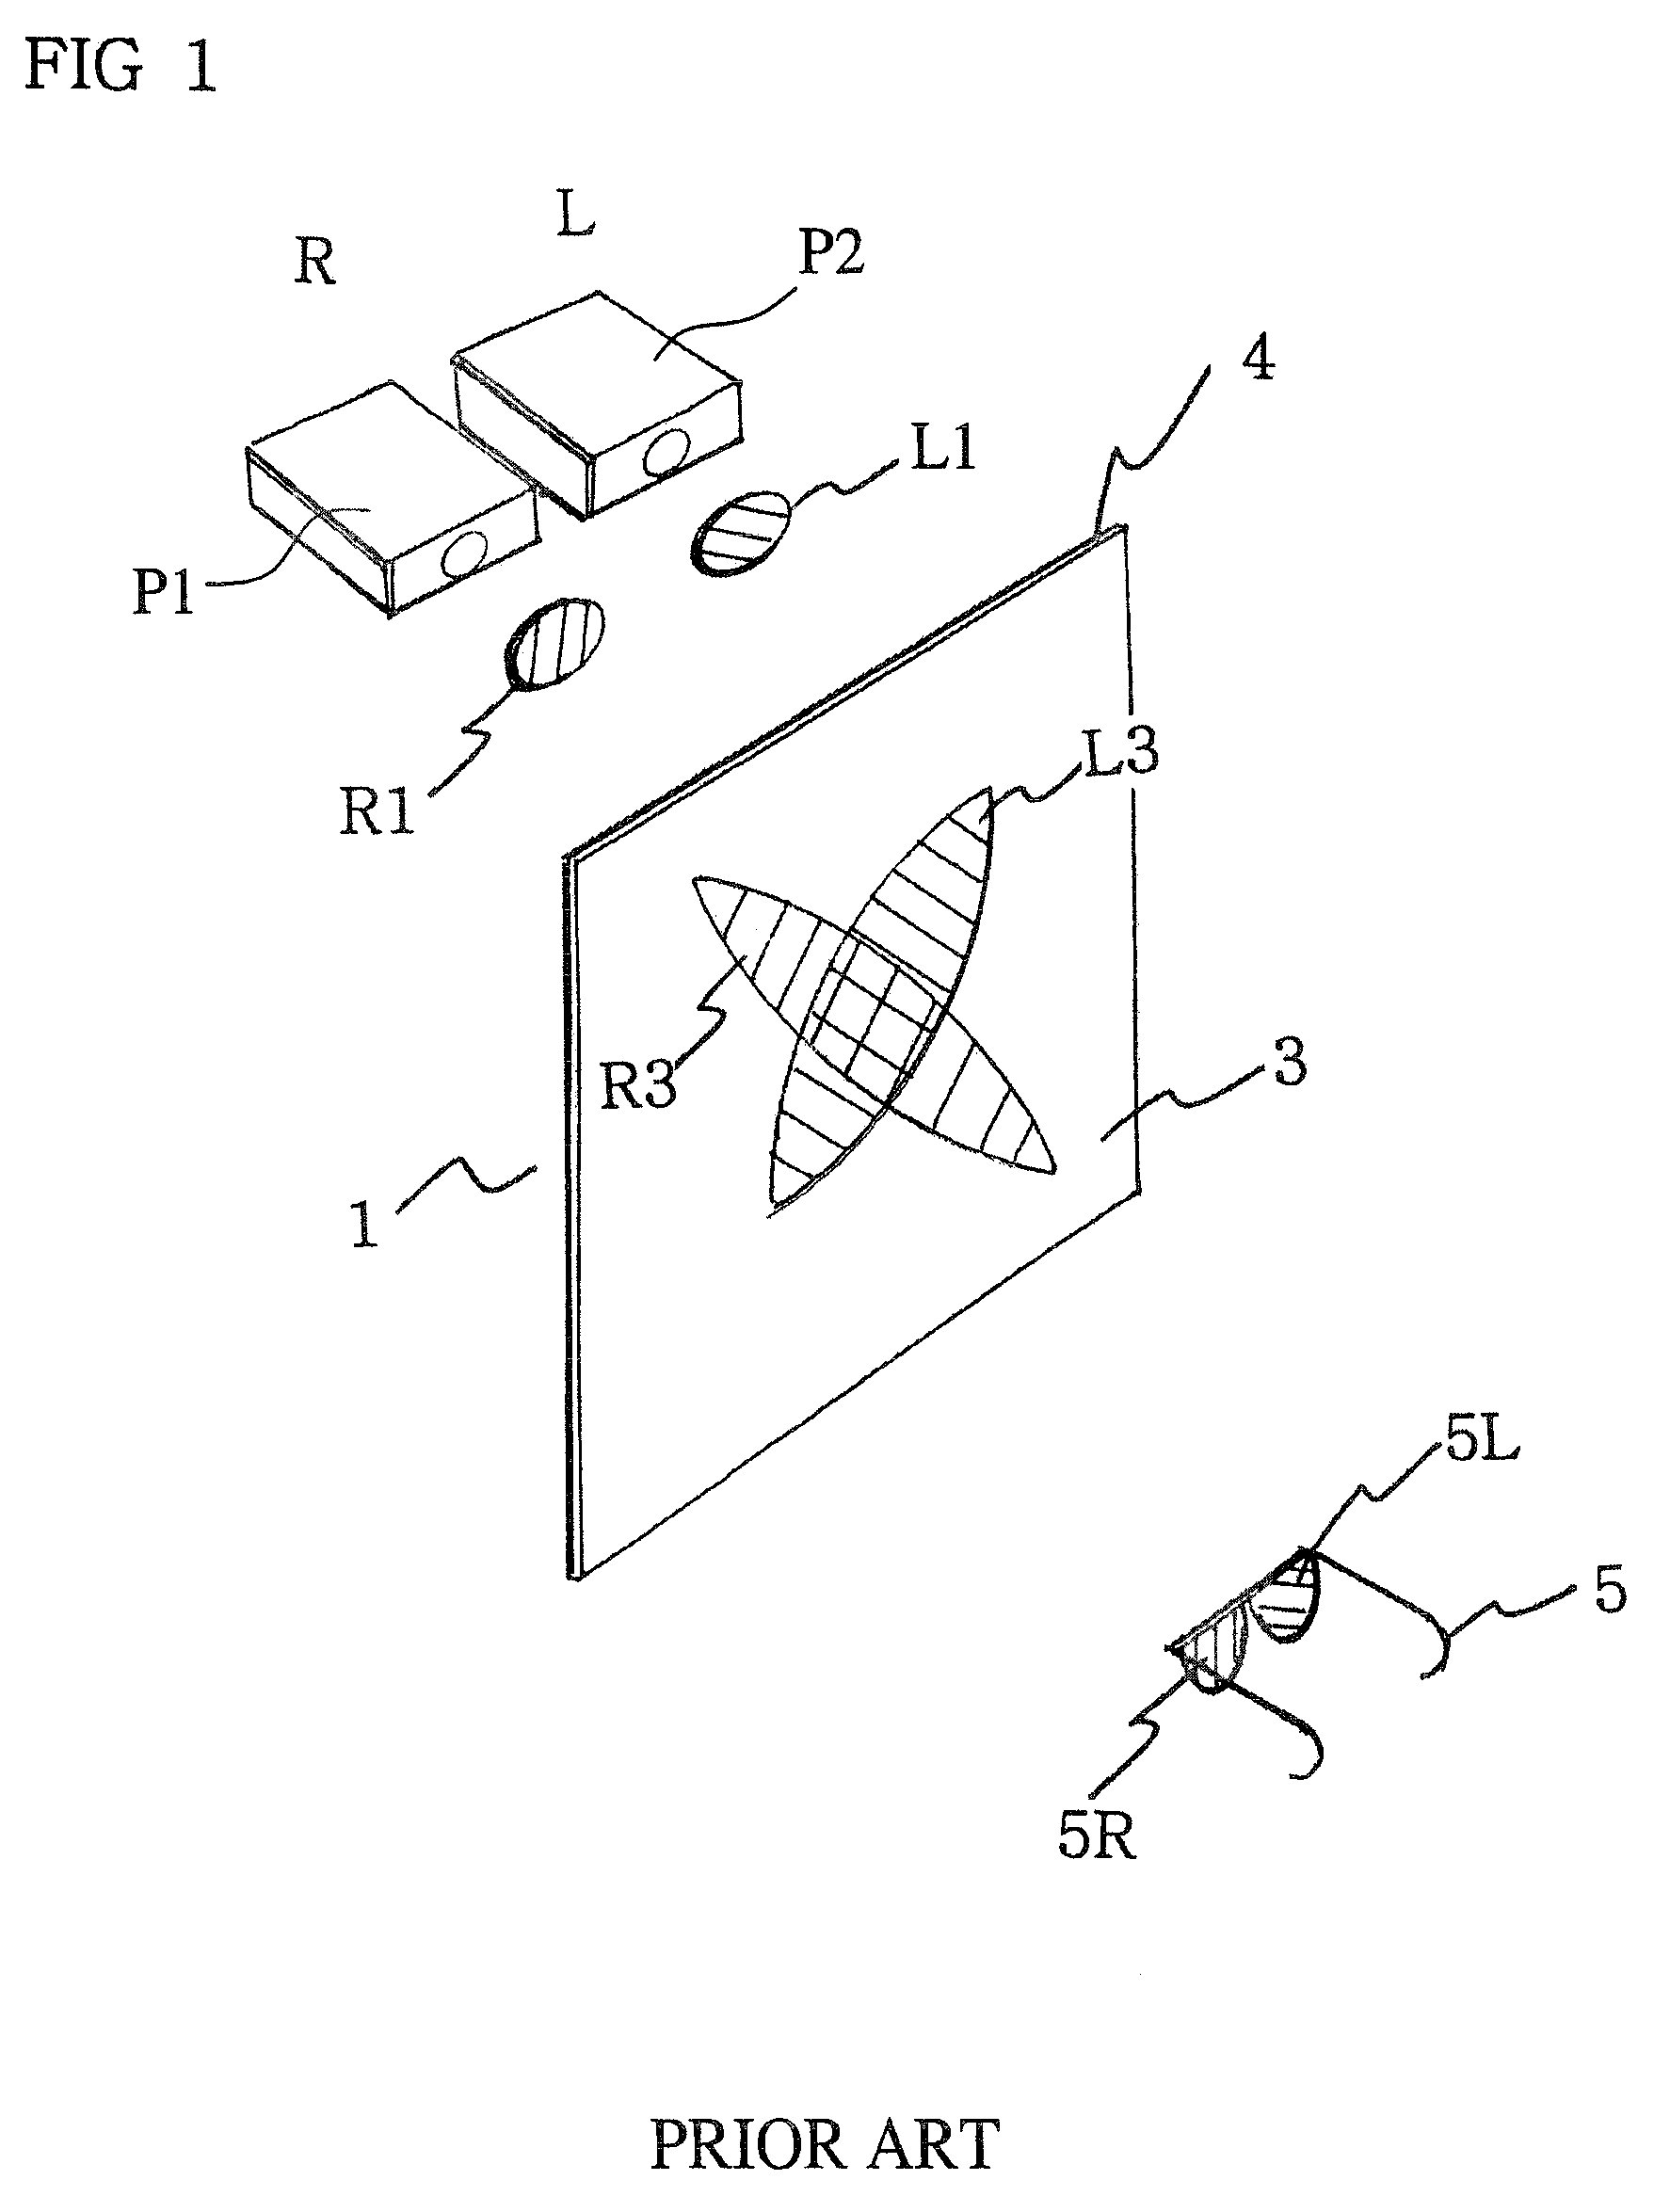 Transmission screen for stereoscopic images